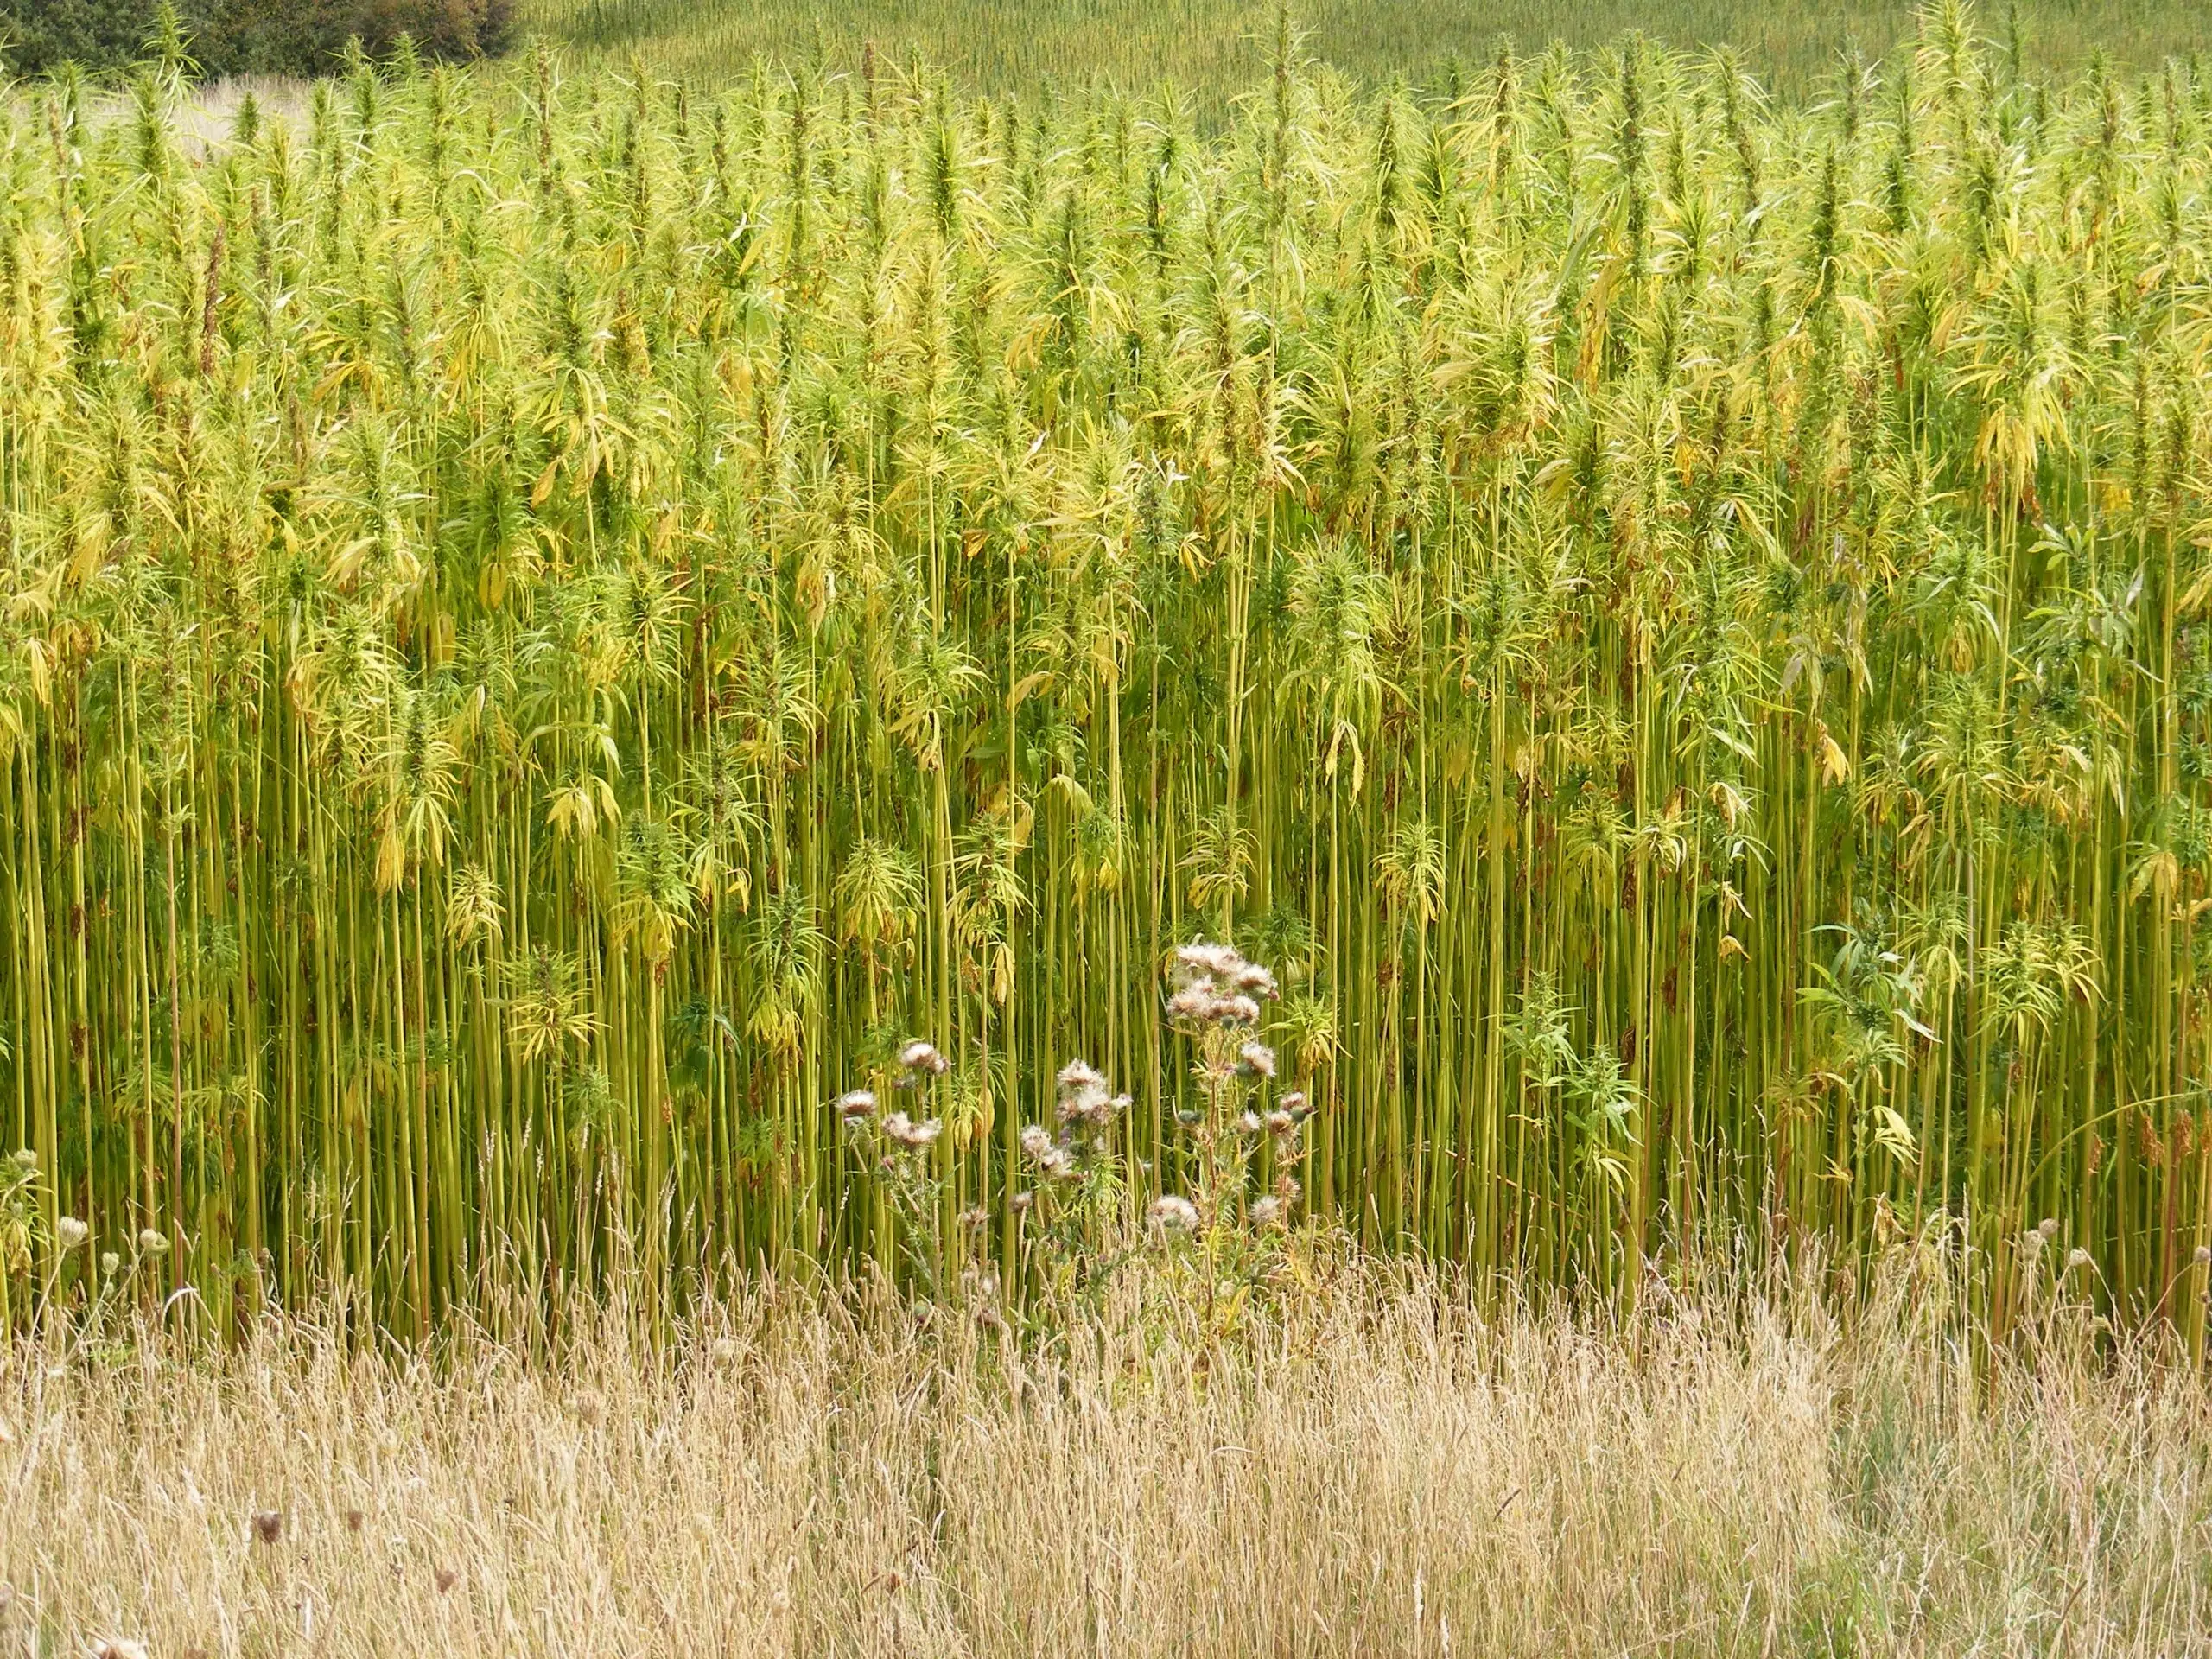 Area director in Chasm area says industrial hemp production could help fill void by closed-down sawmill